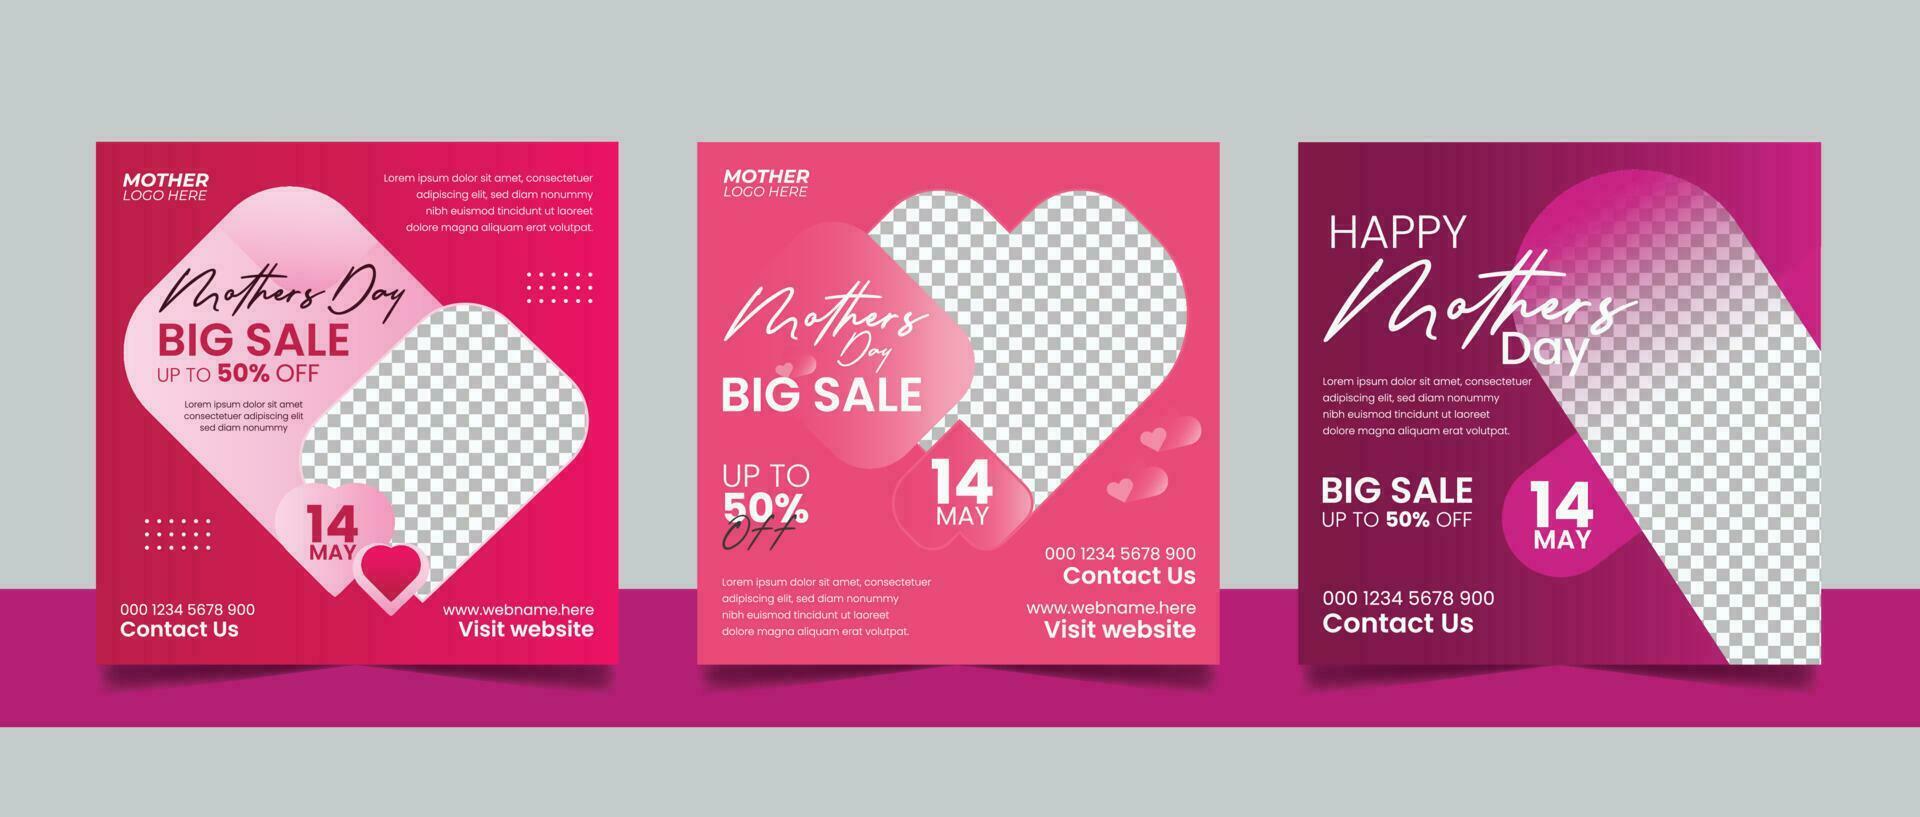 Happy Mothers Day Social Media Post Story Design Square Flyer Web Banner Template Set vector